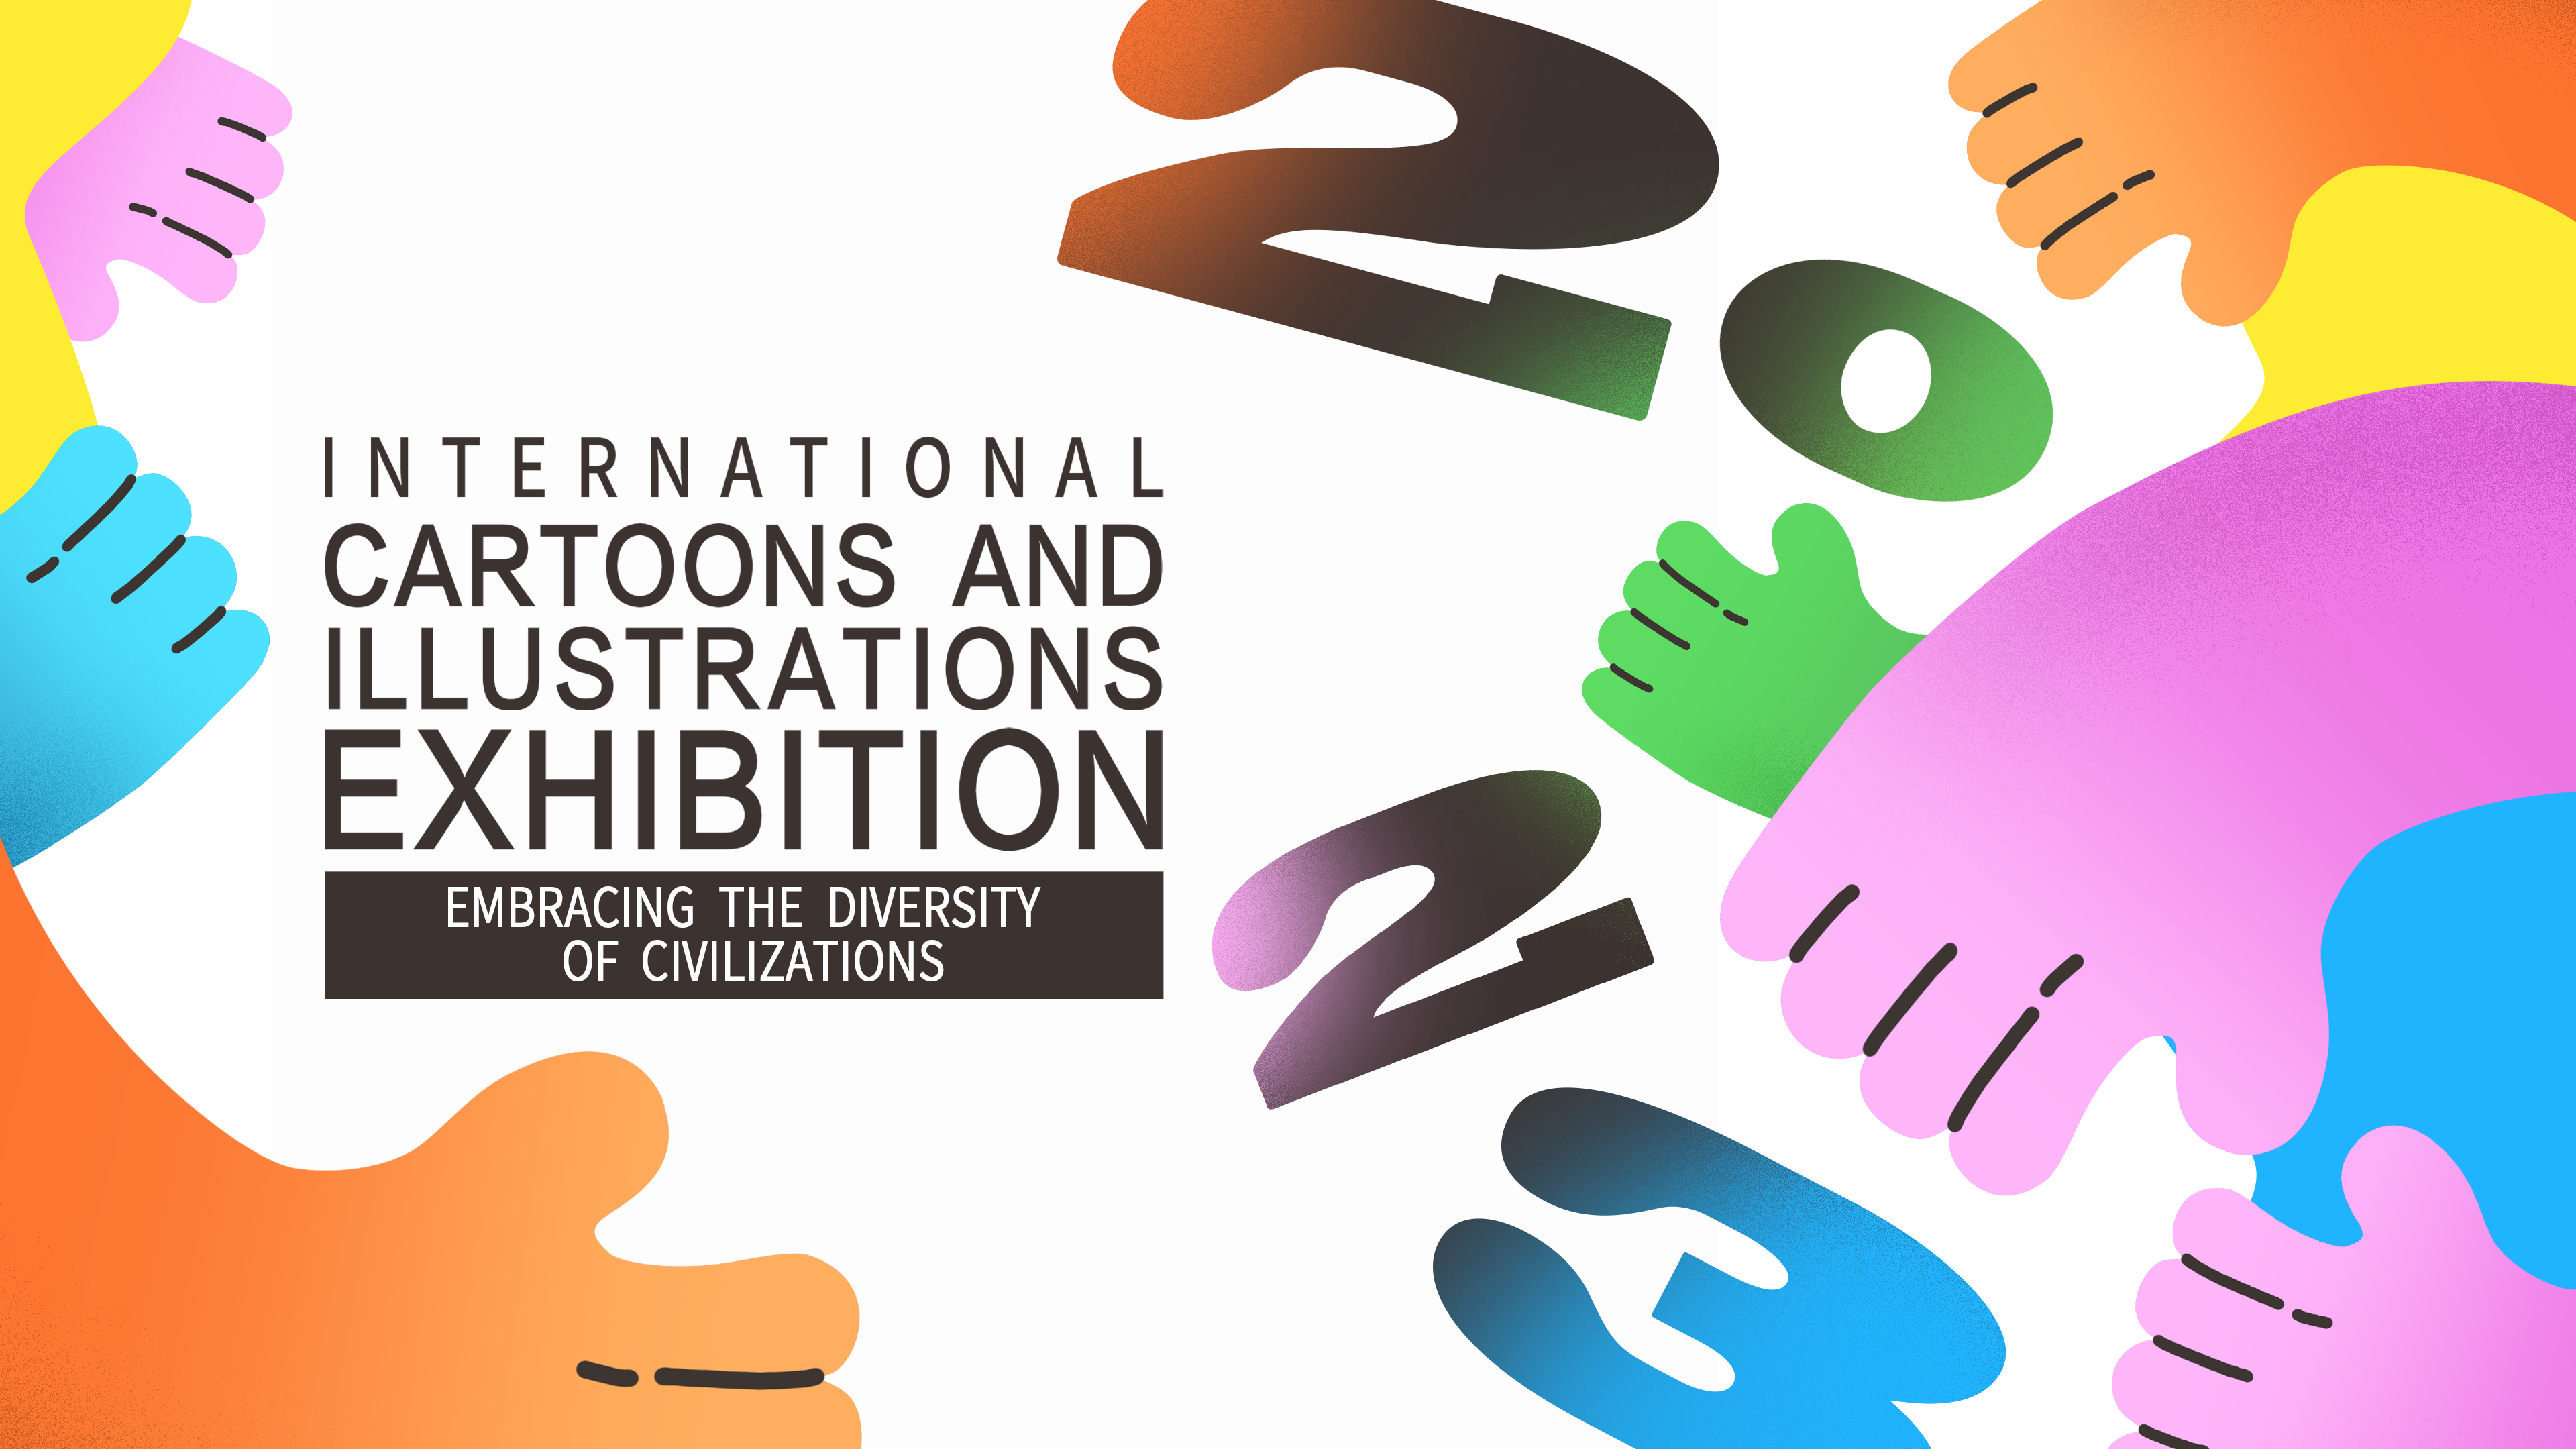 International Cartoons and Illustrations Exhibition 'Embracing the Diversity of Civilizations'